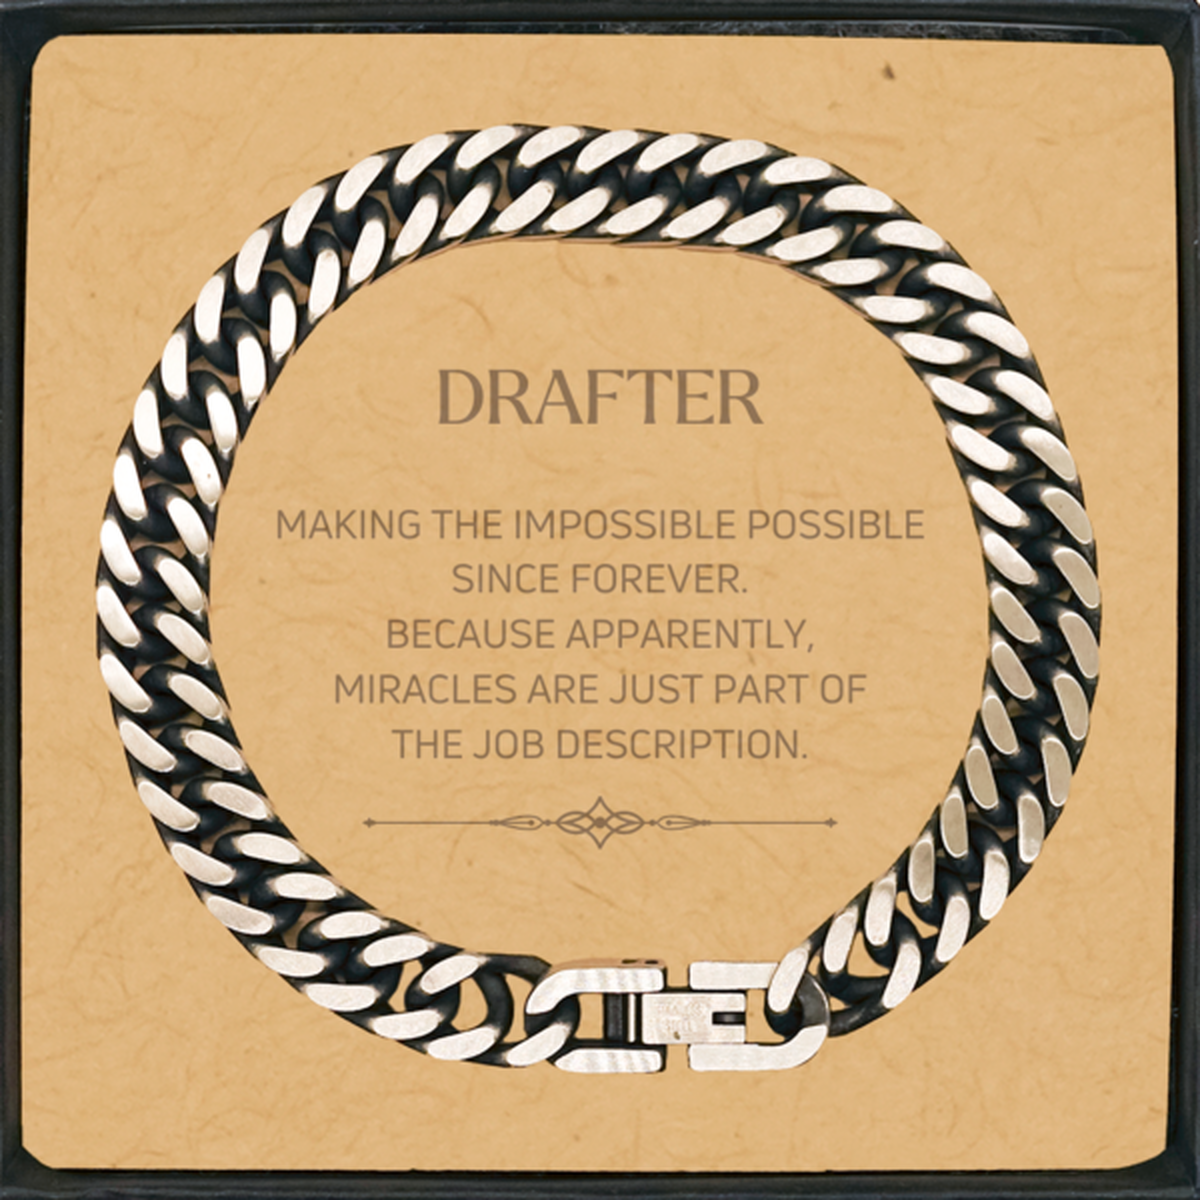 Funny Drafter Gifts, Miracles are just part of the job description, Inspirational Birthday Cuban Link Chain Bracelet For Drafter, Men, Women, Coworkers, Friends, Boss